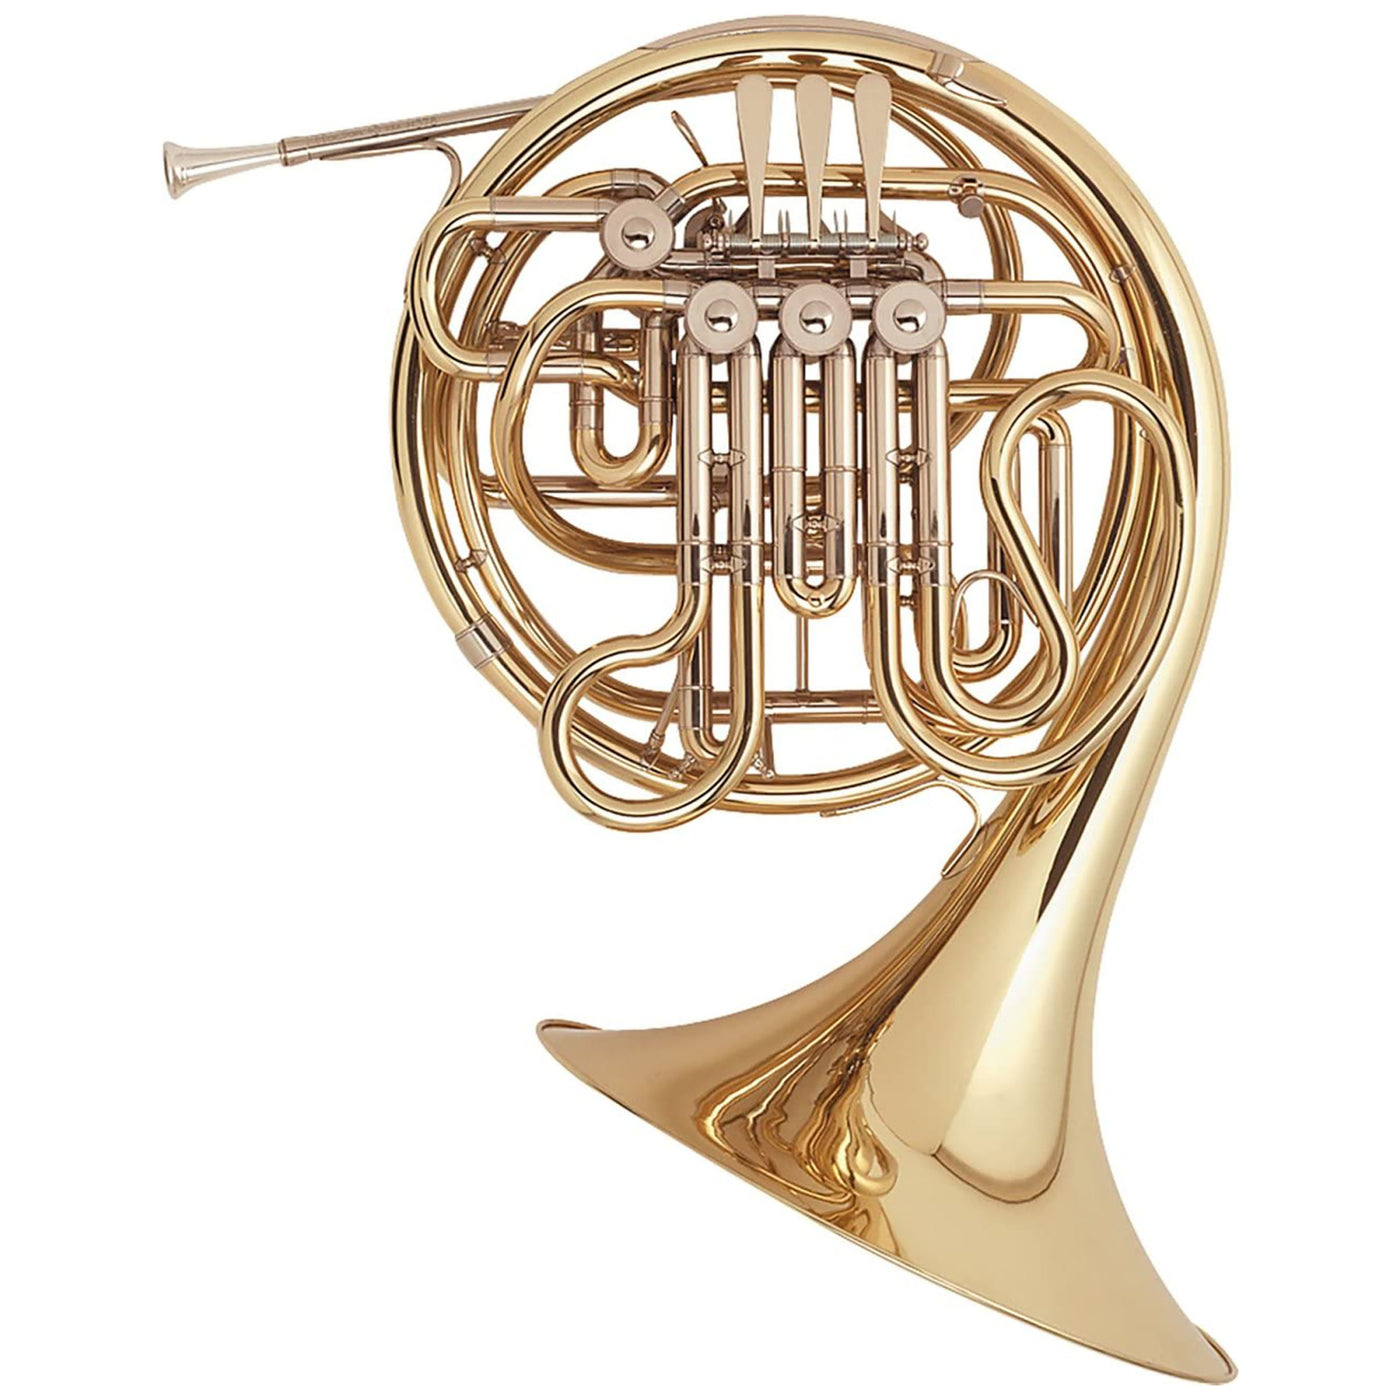 Holton H378 Double French Horn Outfit